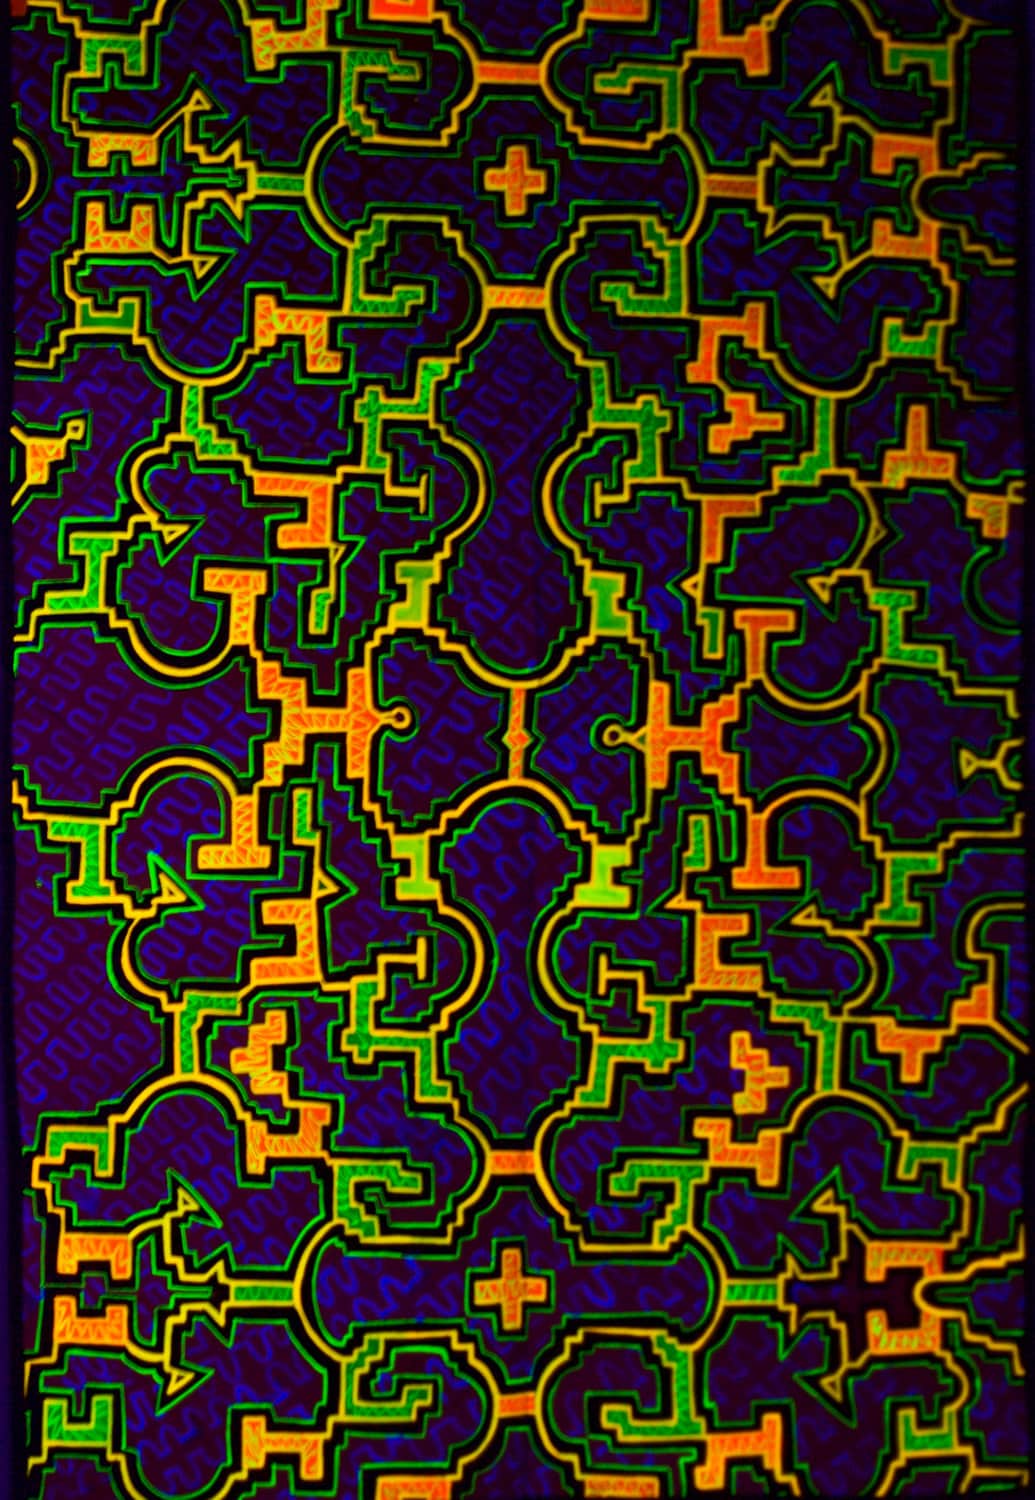 Visionary Yage UV Painting - 90x60cm - handmade on order - fully blacklight glowing colors - psychedelic dmt visionary artwork